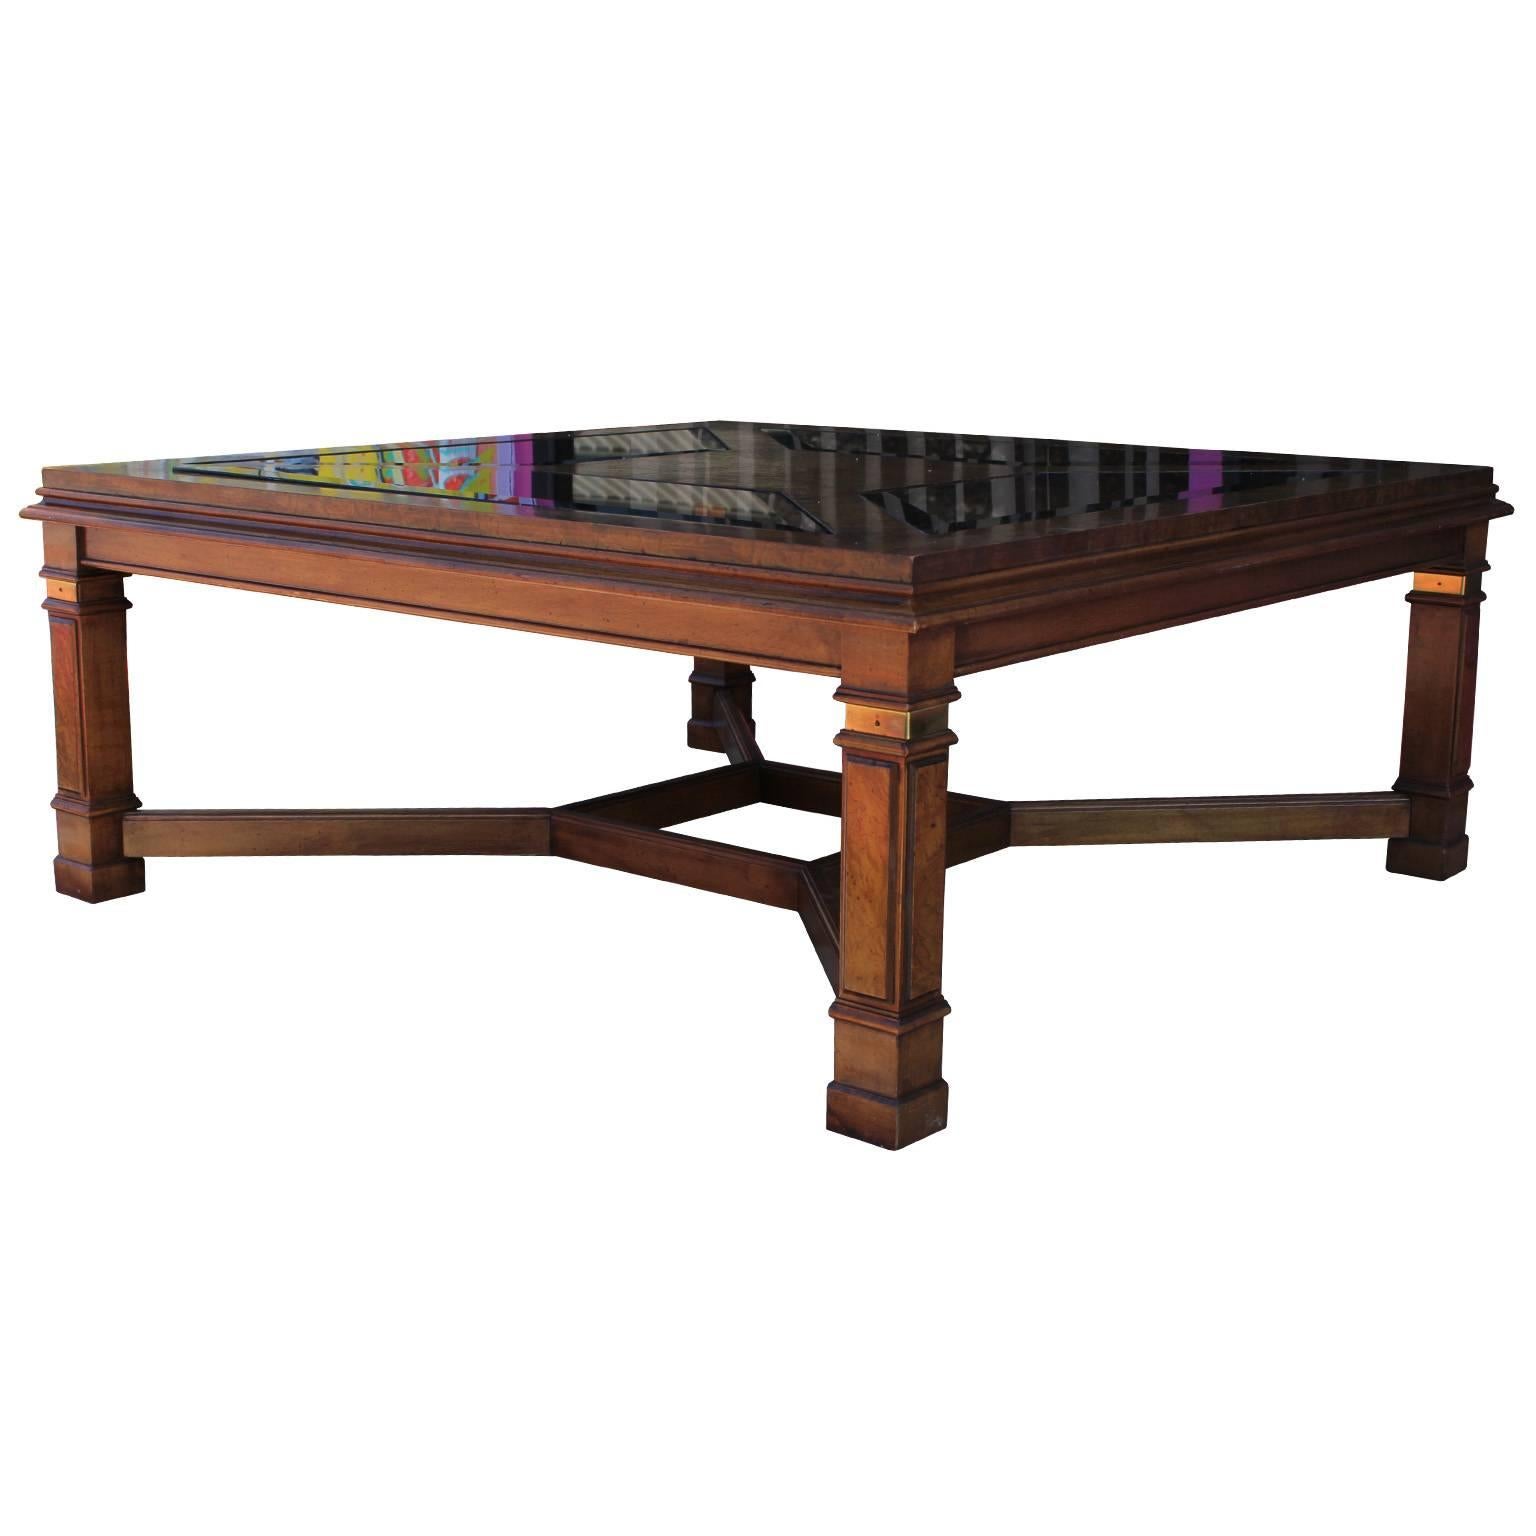 Elegant square coffee table. Tabletop is in burl wood with smoked glass panels. Panels mimic shape created by stretcher. Legs have brass band accents. Table has a wonderful attention to detail. Excellent in a traditional, Hollywood regency, or